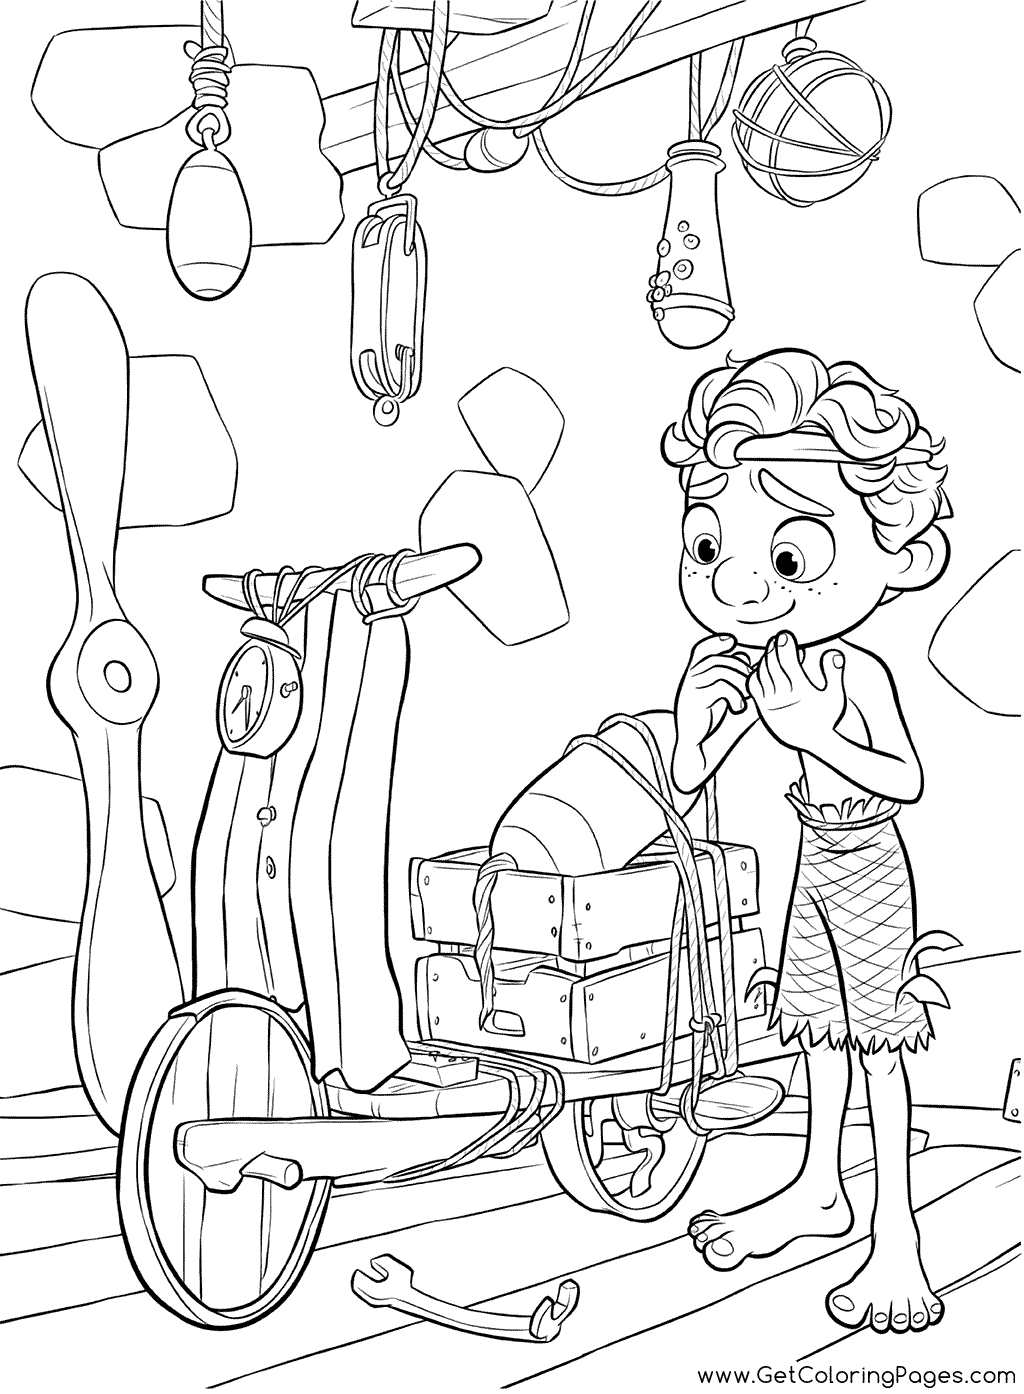 Luca and Vespa Scooter Coloring Page